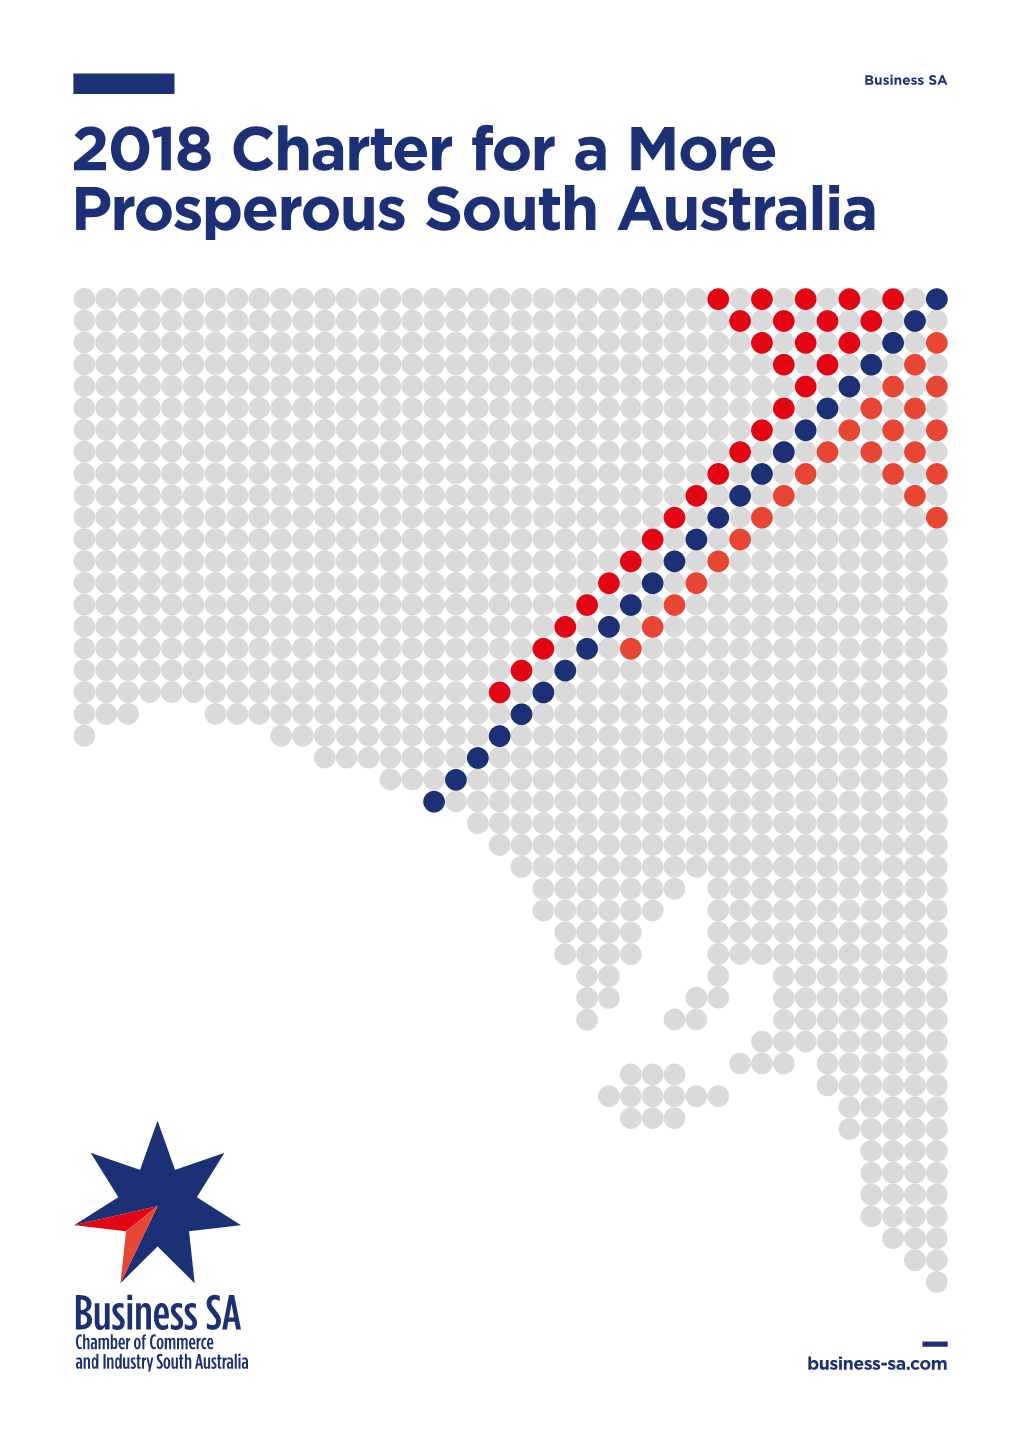 2018 Charter for a More Prosperous South Australia